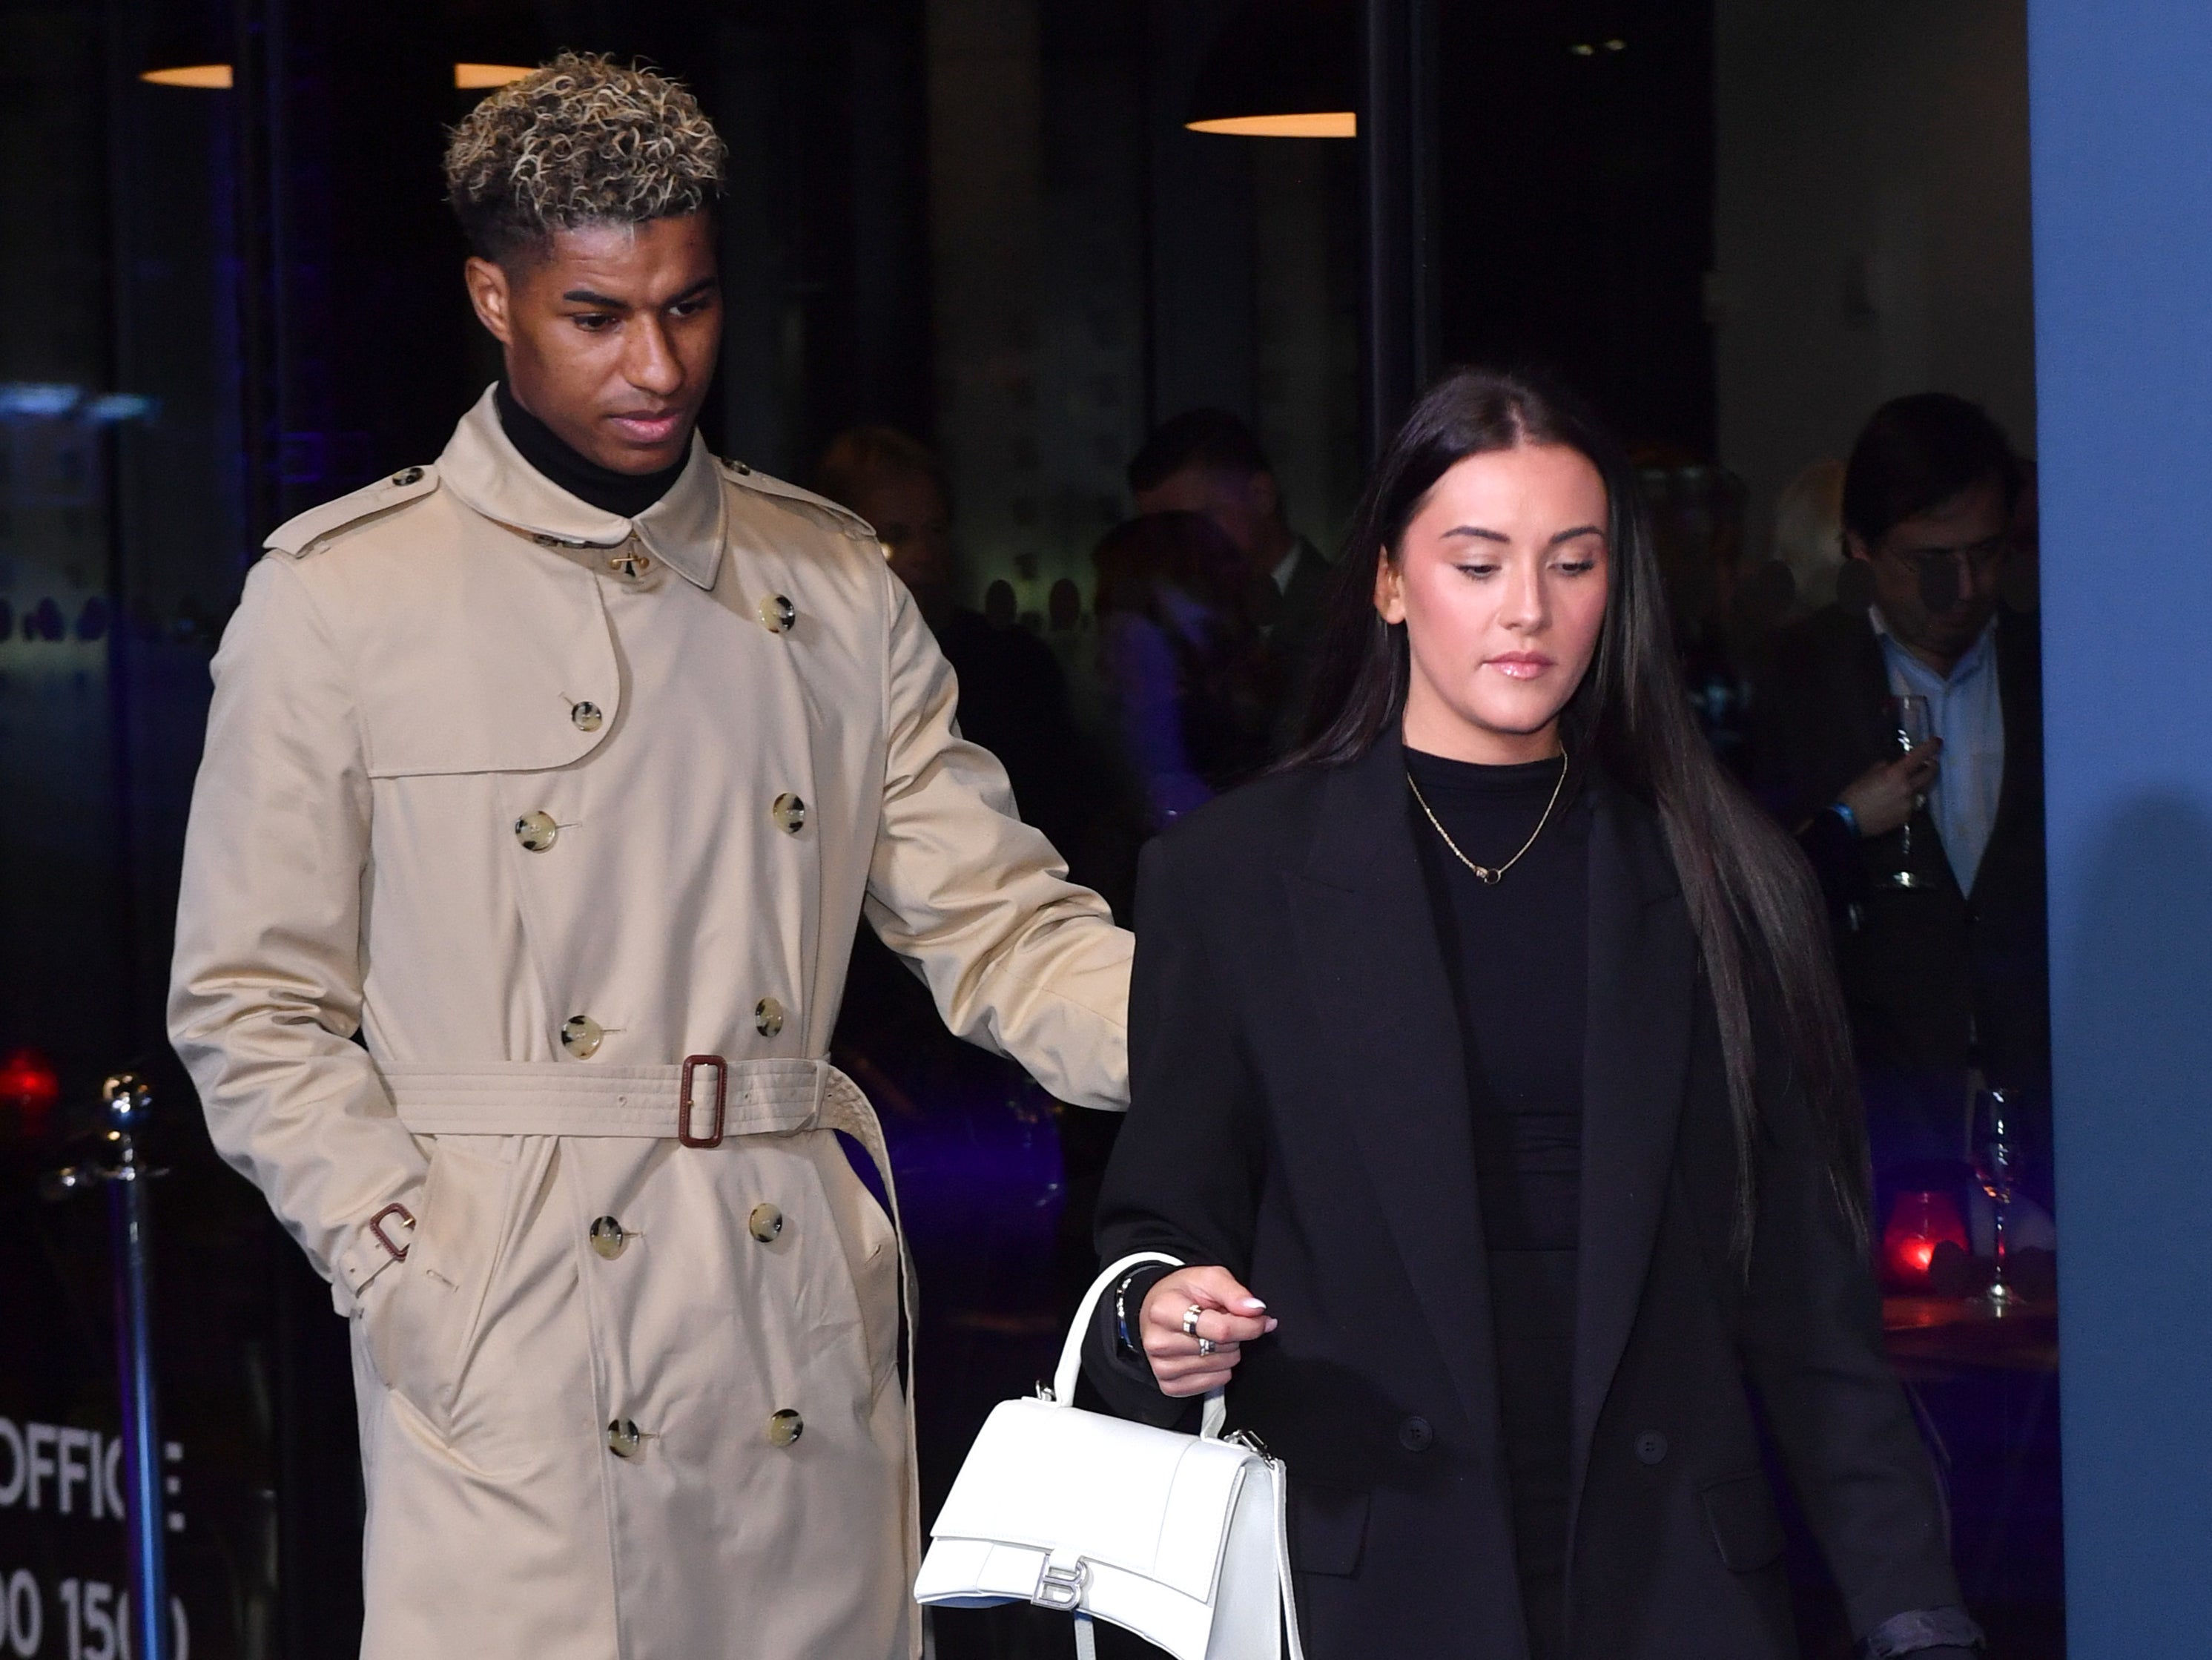 Marcus Rashford and Lucia Loi attend the "Rooney" World Premiere at Home on February 09, 2022 in Manchester